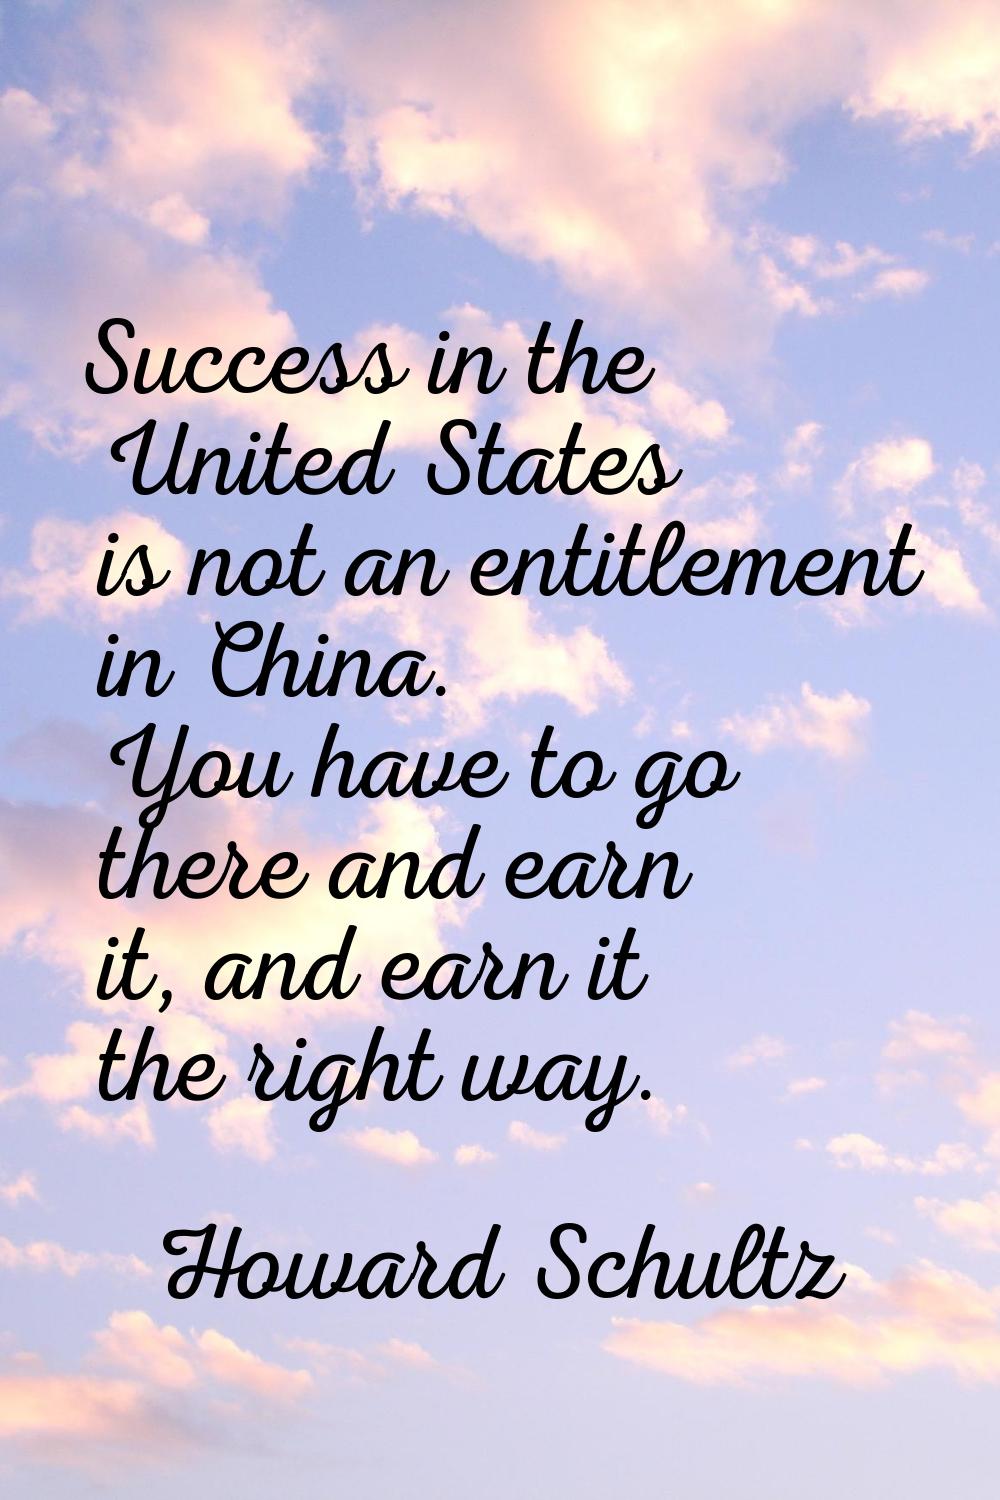 Success in the United States is not an entitlement in China. You have to go there and earn it, and 